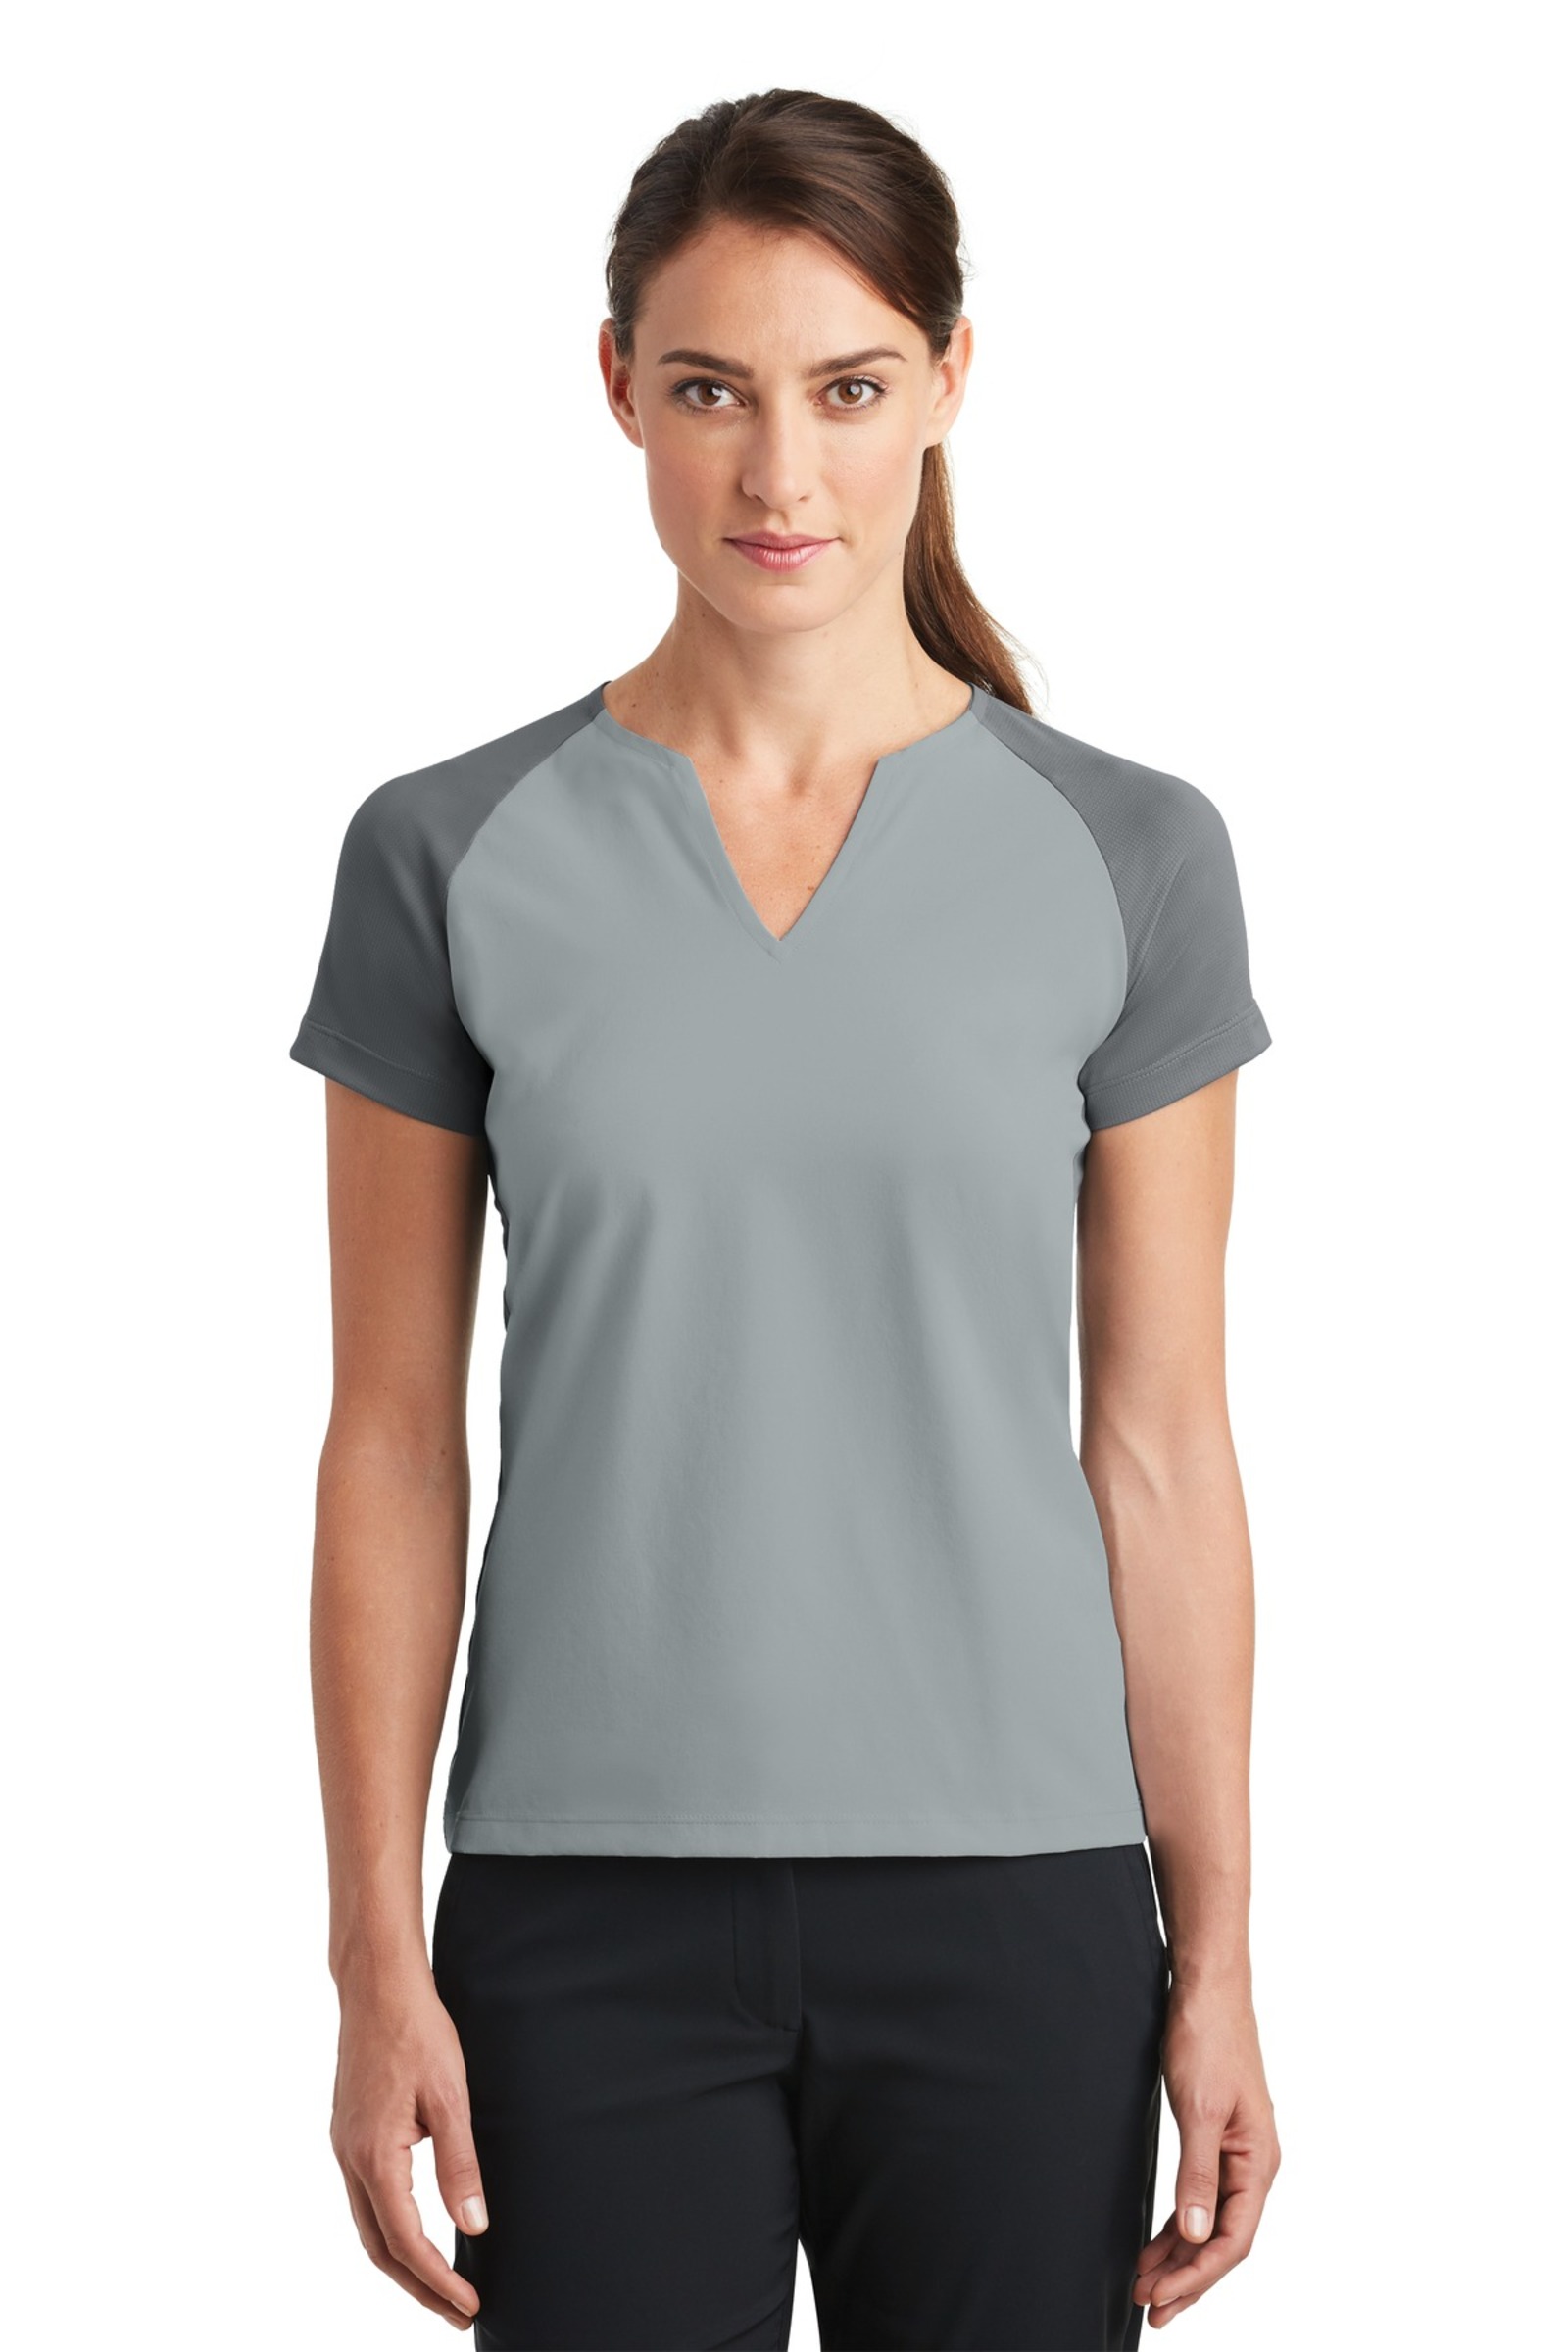 Nike Golf Embroidered Women's Dri-FIT Stretch Woven V-Neck Top